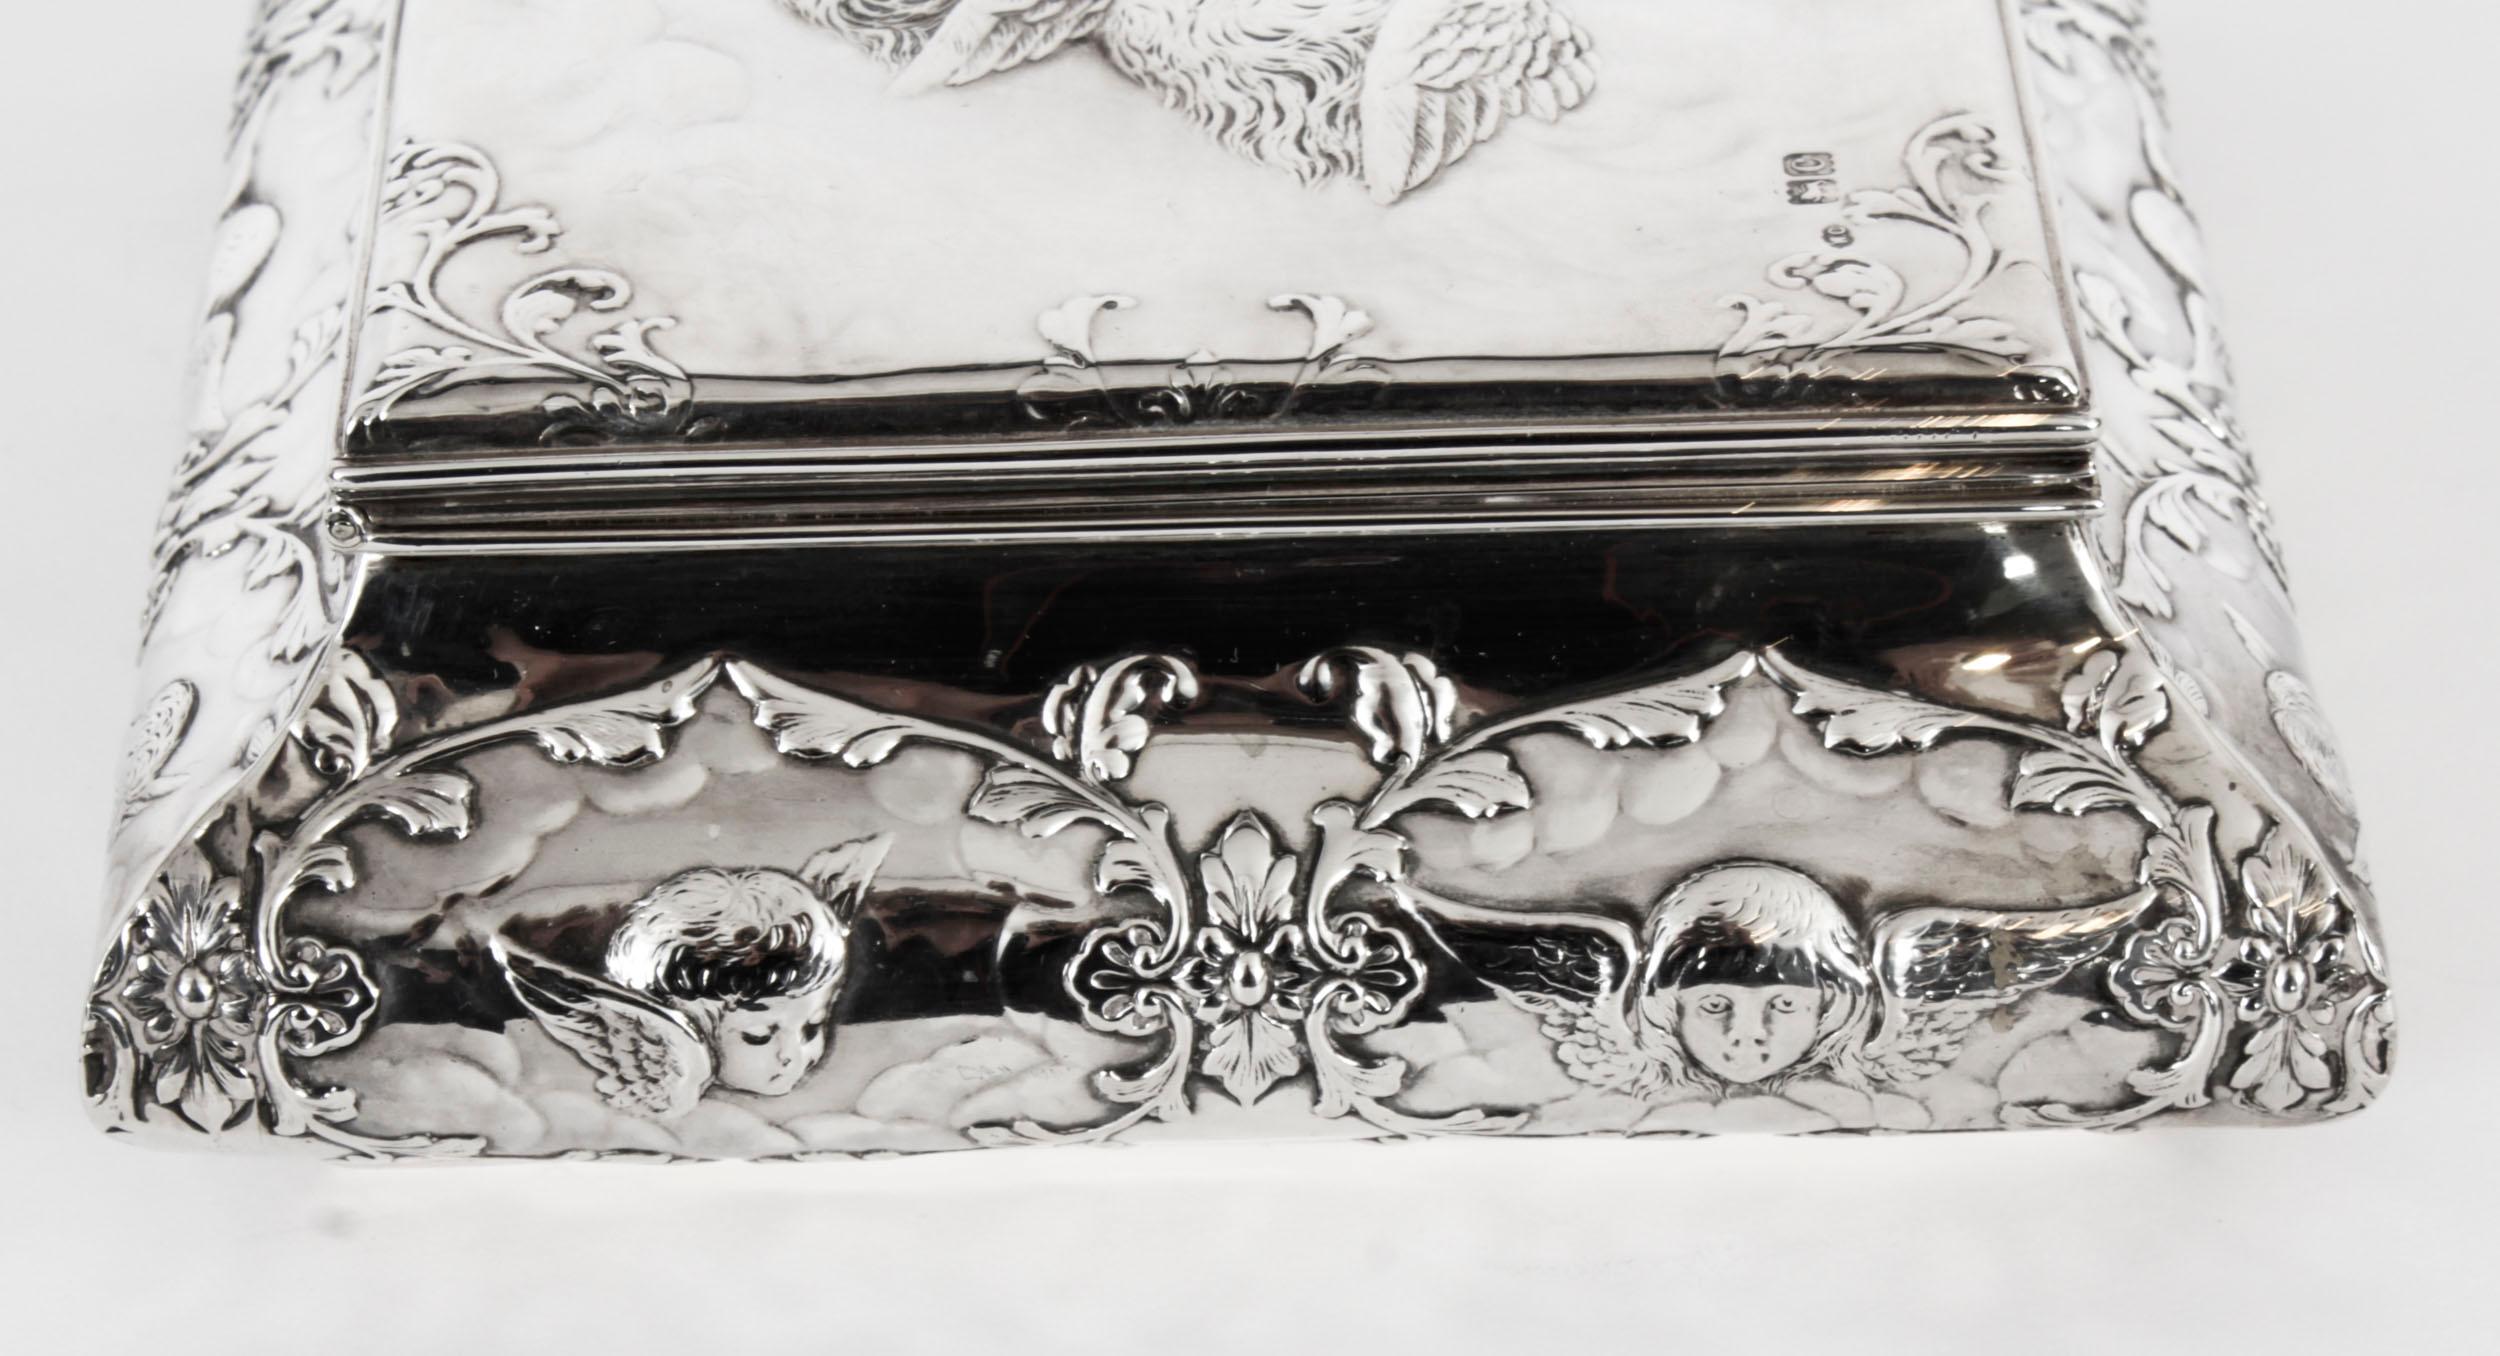 Antique Victorian Sterling Silver Casket by William Comyns & Sons 1898 For Sale 4